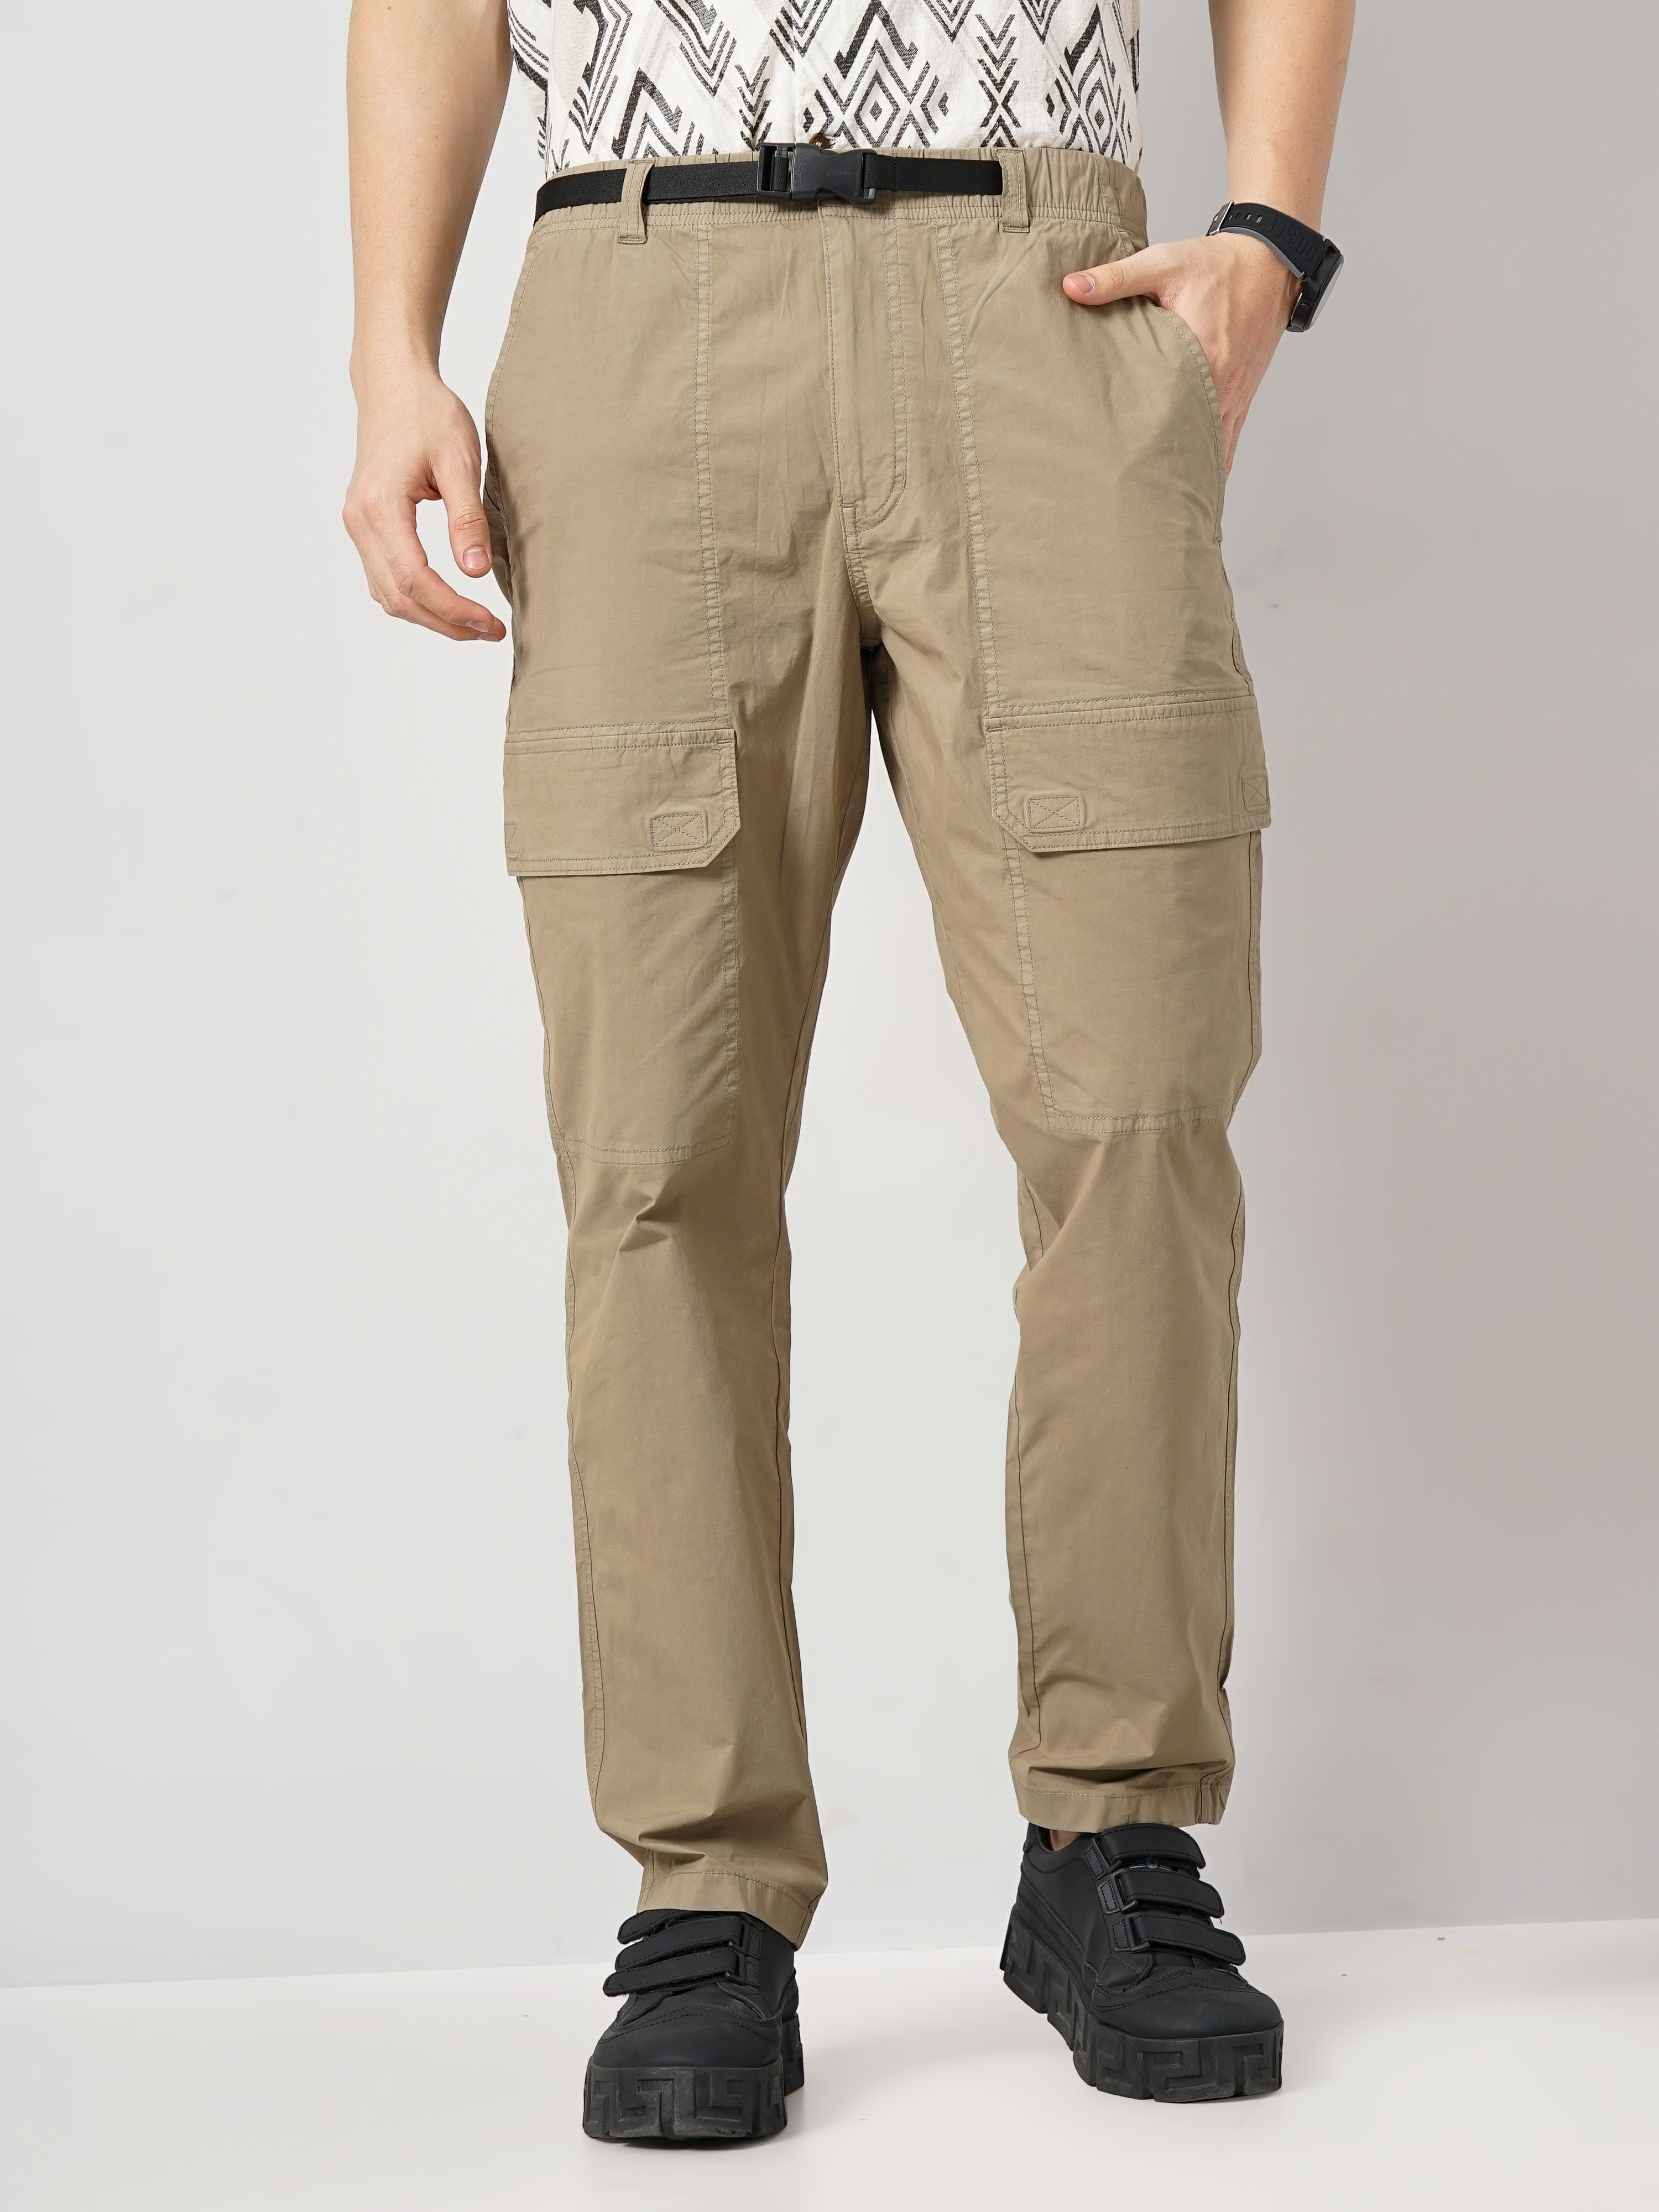 Mens Khaki Drawstring Cargo Pants Ankle Length 9 Part Cotton Cargo Trousers  For Streetwear, Casual Work, And Military Style X0809 From  Fashion_official01, $20.16 | DHgate.Com